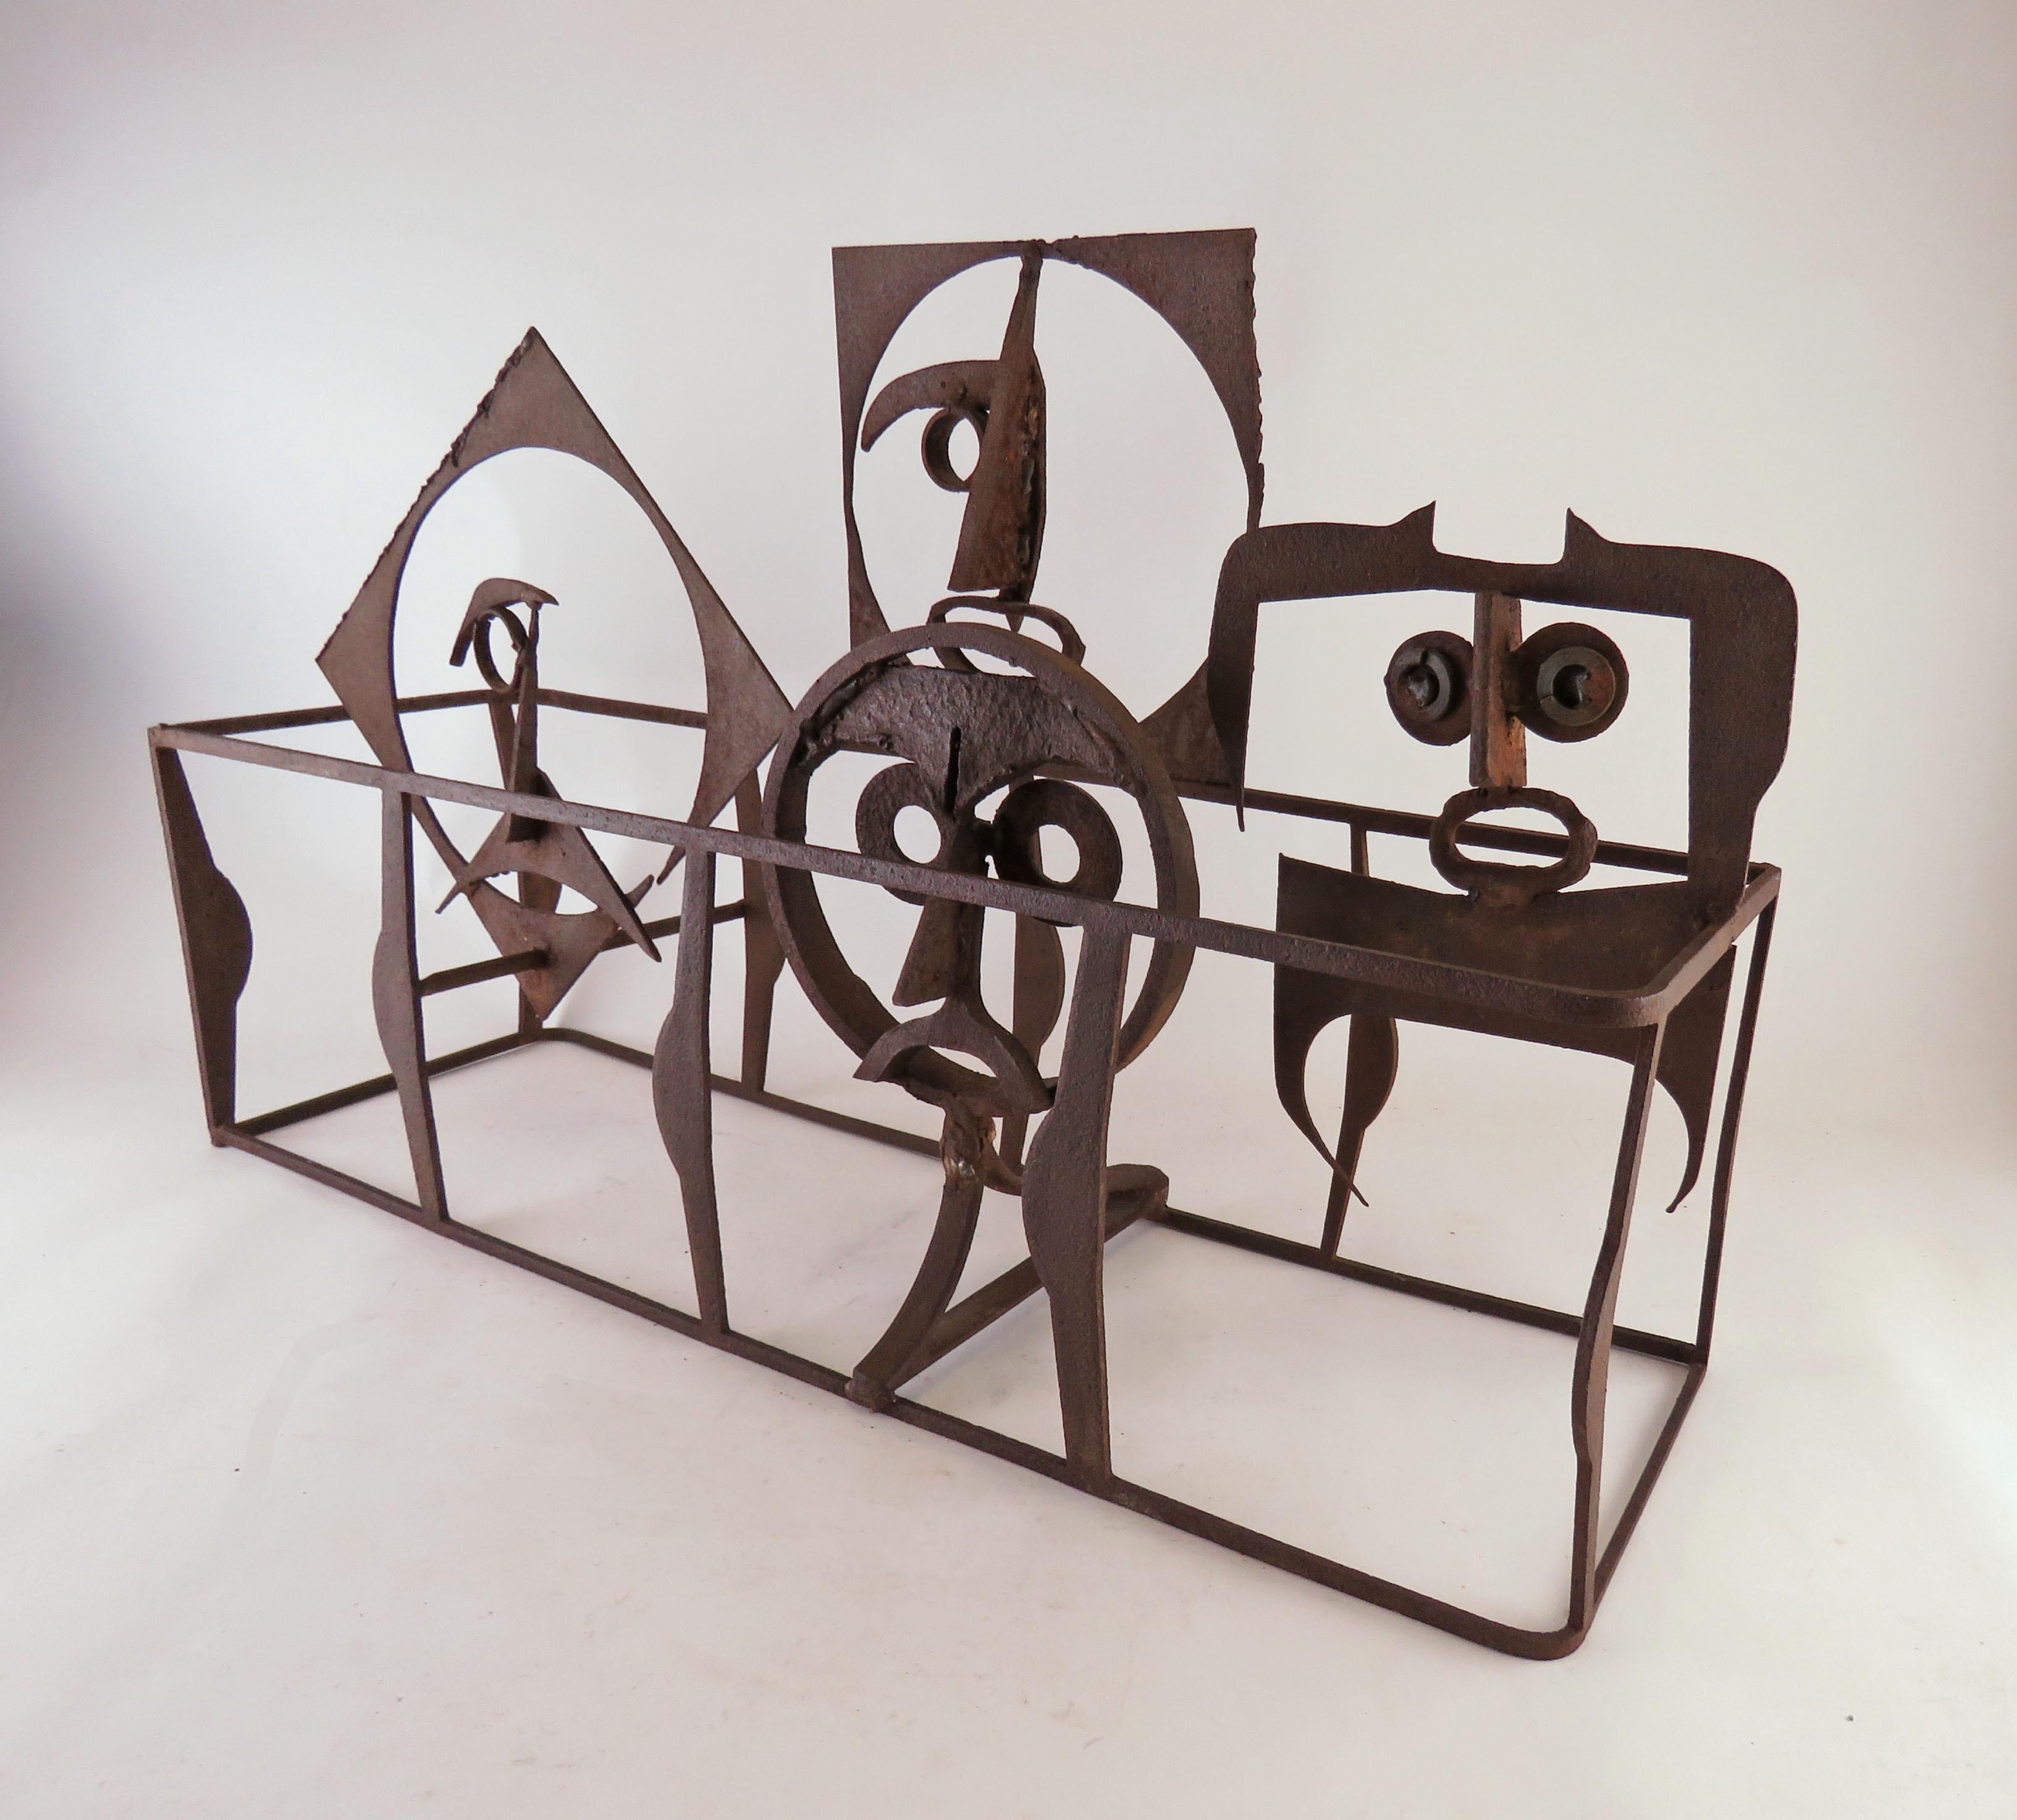 Whimsical steel sculpture of pattern castoffs, in the manner of John Risley, circa 1960s. Measures: 25” wide, 16” high, 7” deep.